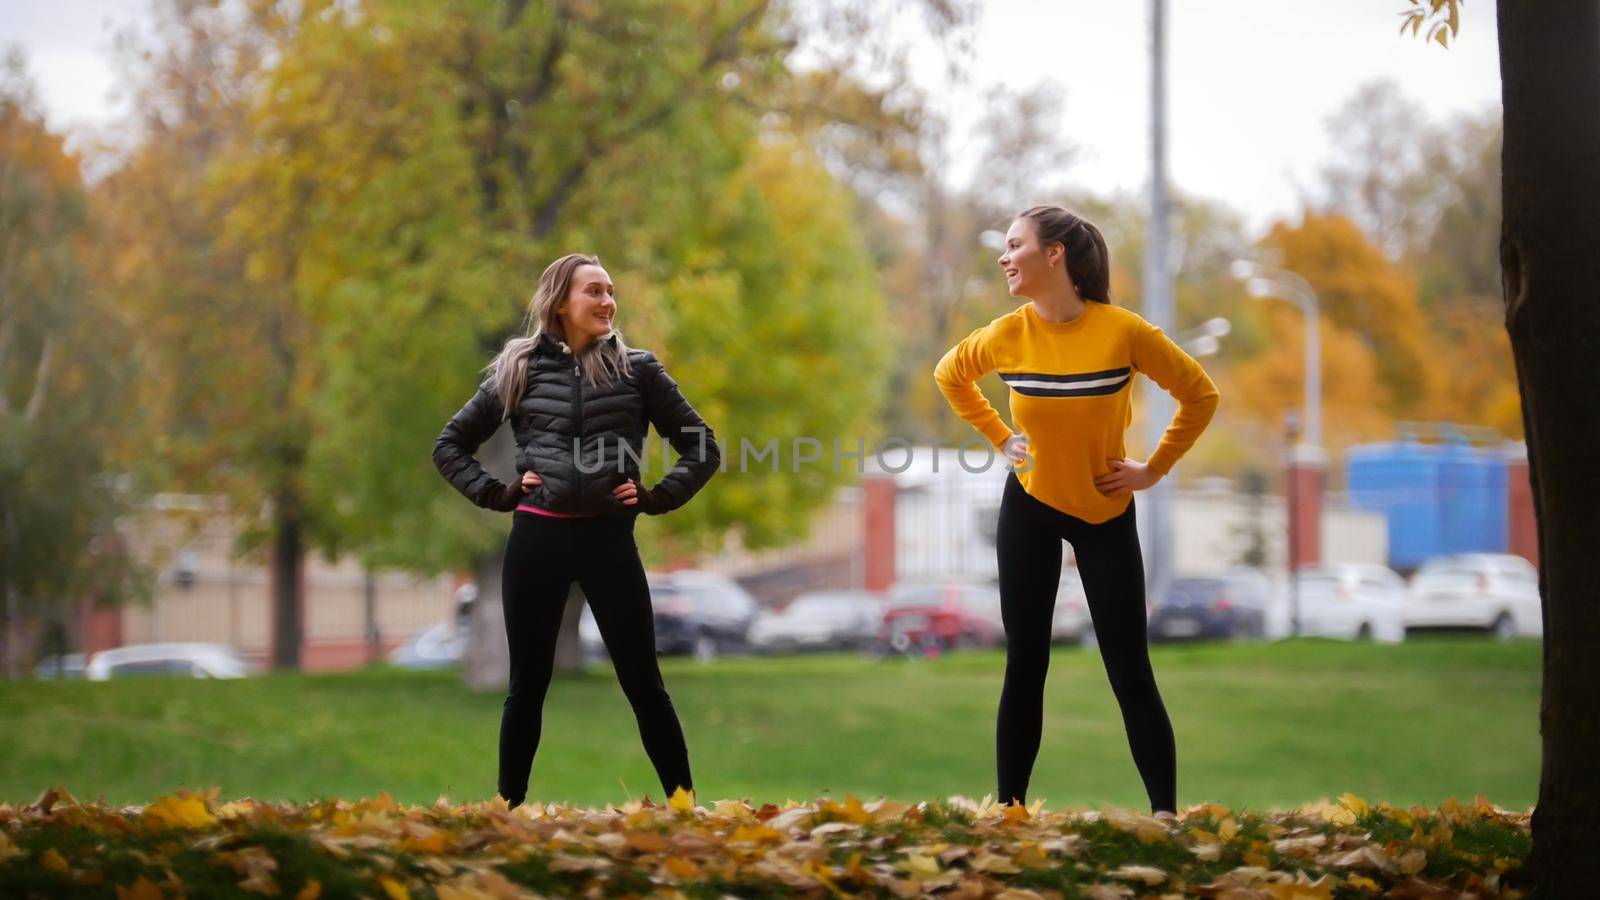 Girls warming up outside before training in park. Hands to the sides. Autumn. by Studia72